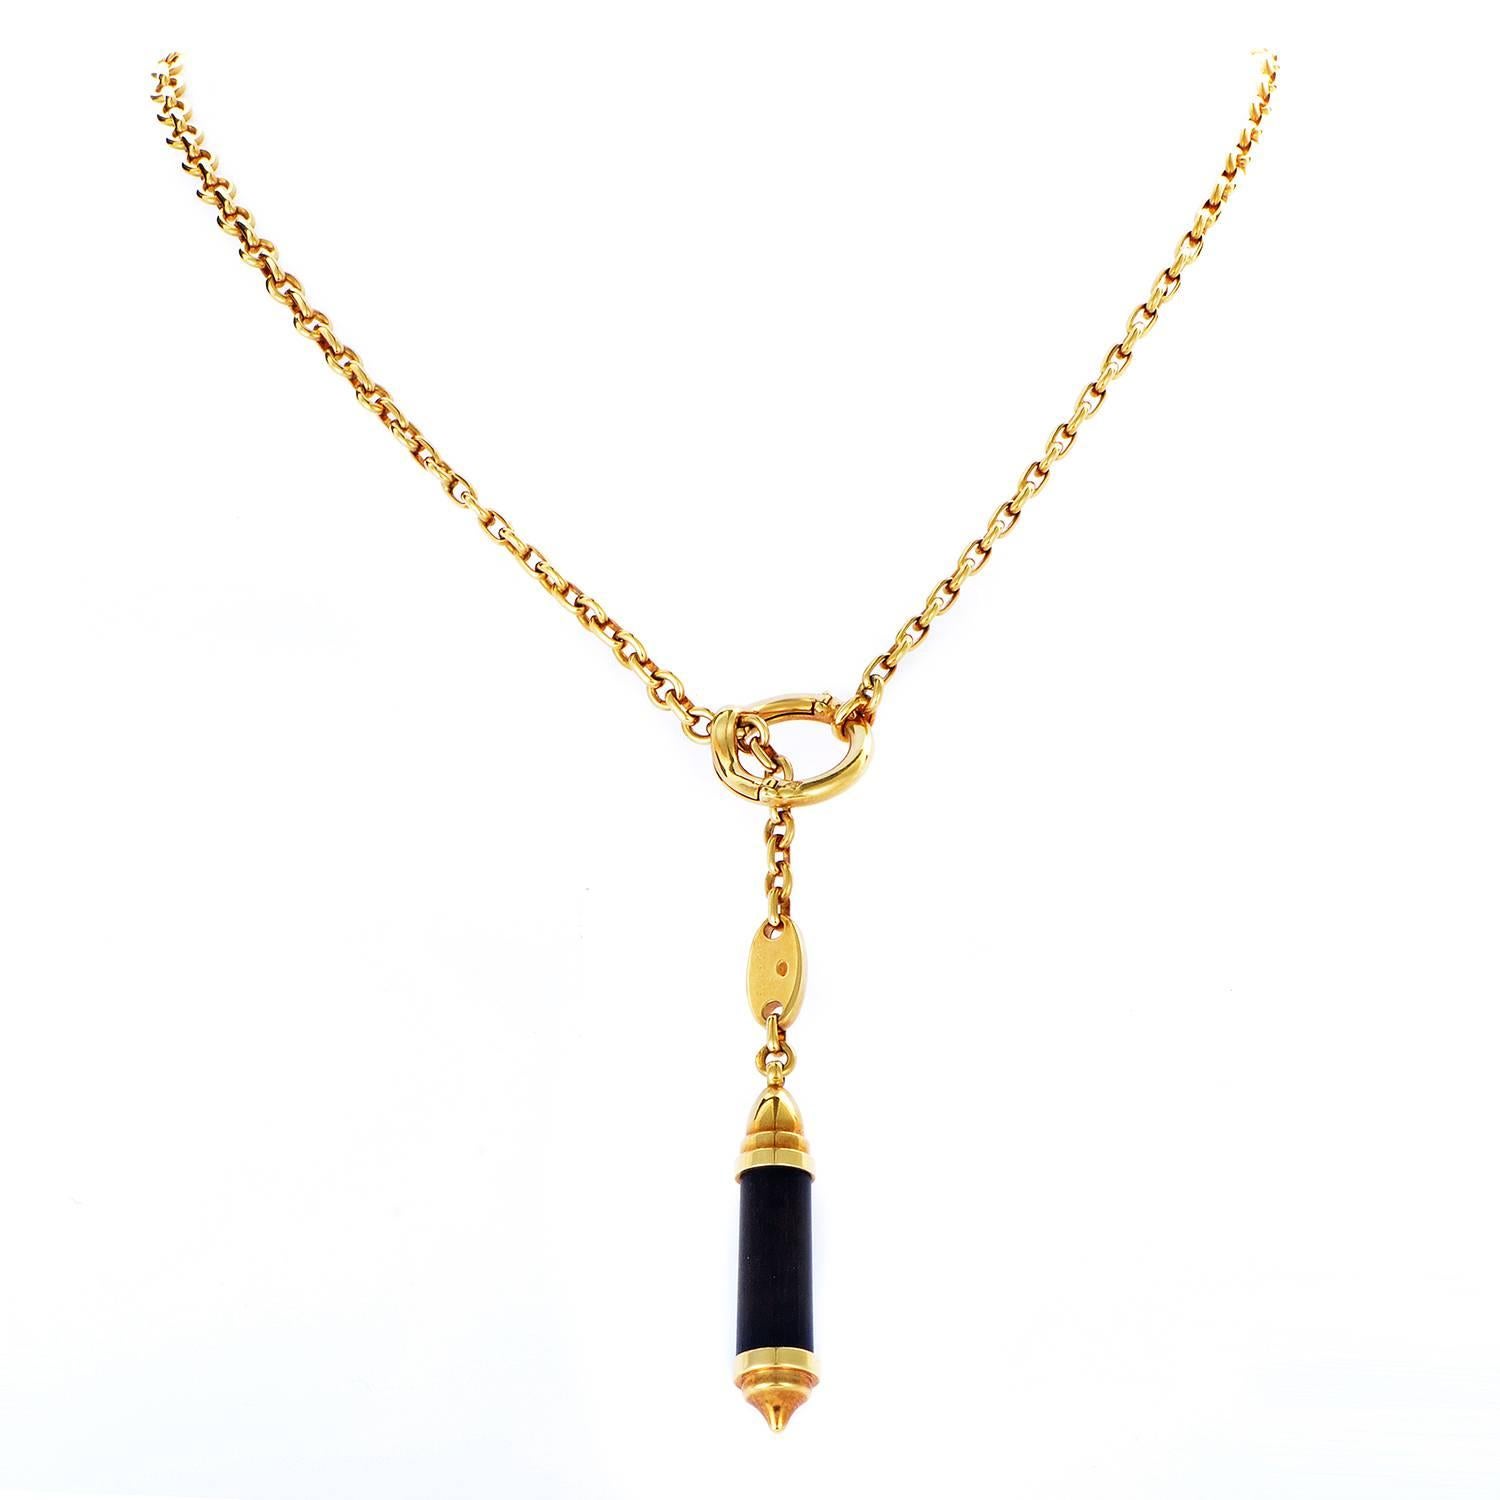 Producing eye-catching allure through striking contrast provided by captivating dark ebony wood against the warm, romantic tone of 18K yellow gold, this gorgeous necklace from Chaumet combines aesthetic qualities of these materials in wonderful